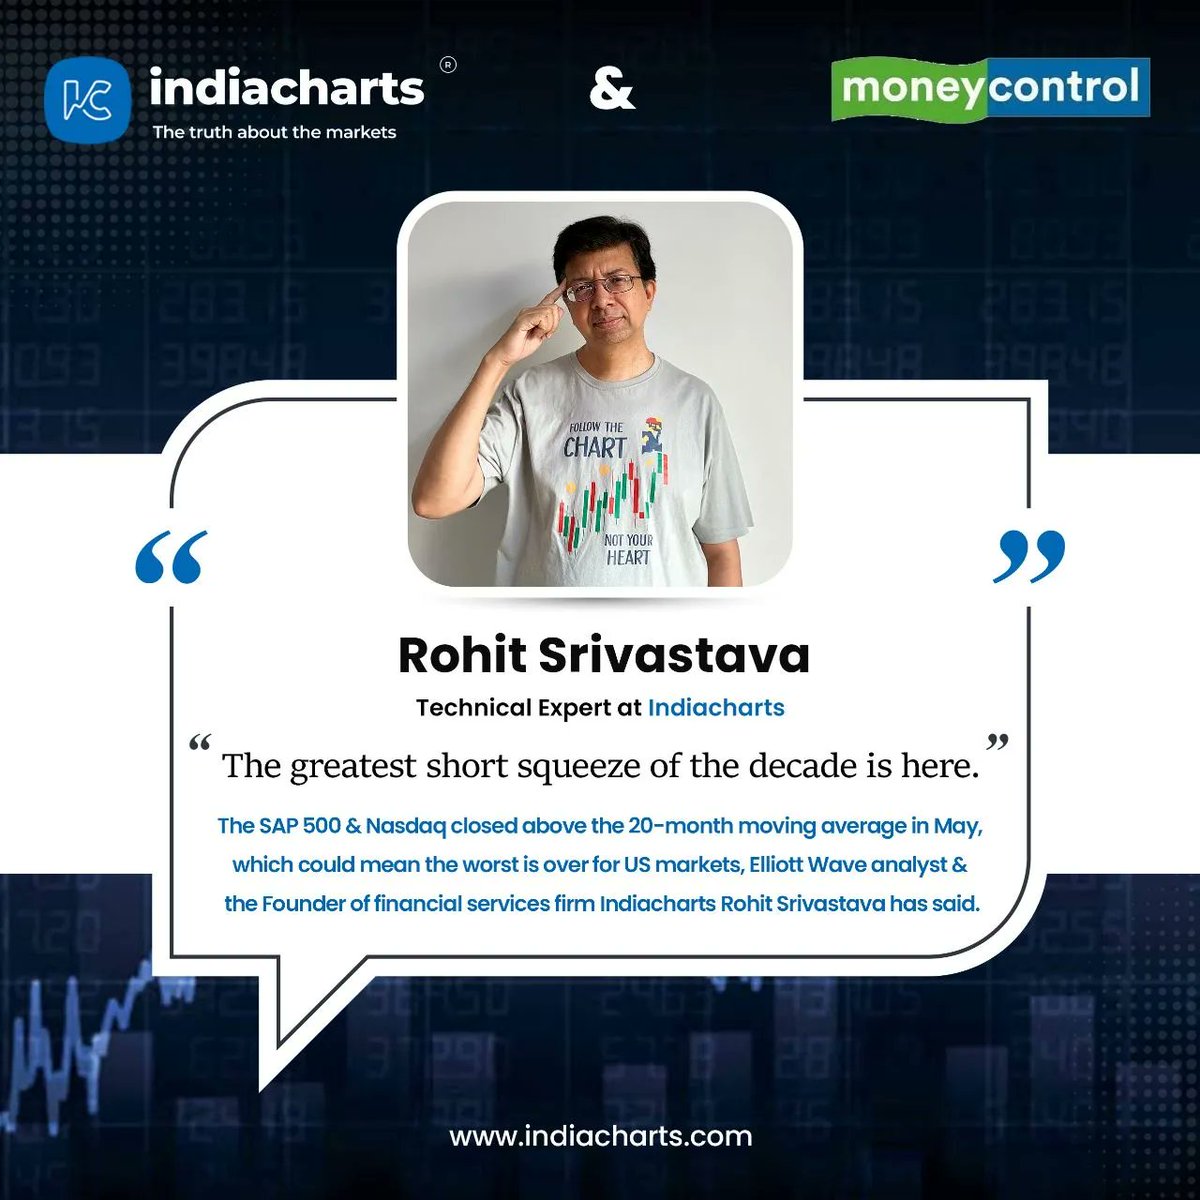 The greatest short squeeze of the decade is here!

Article - buff.ly/3NbtUjO

#stocks #analysis #article #moneycontrol #technicalanalysis #invest #indiacharts #rohitsrivastava